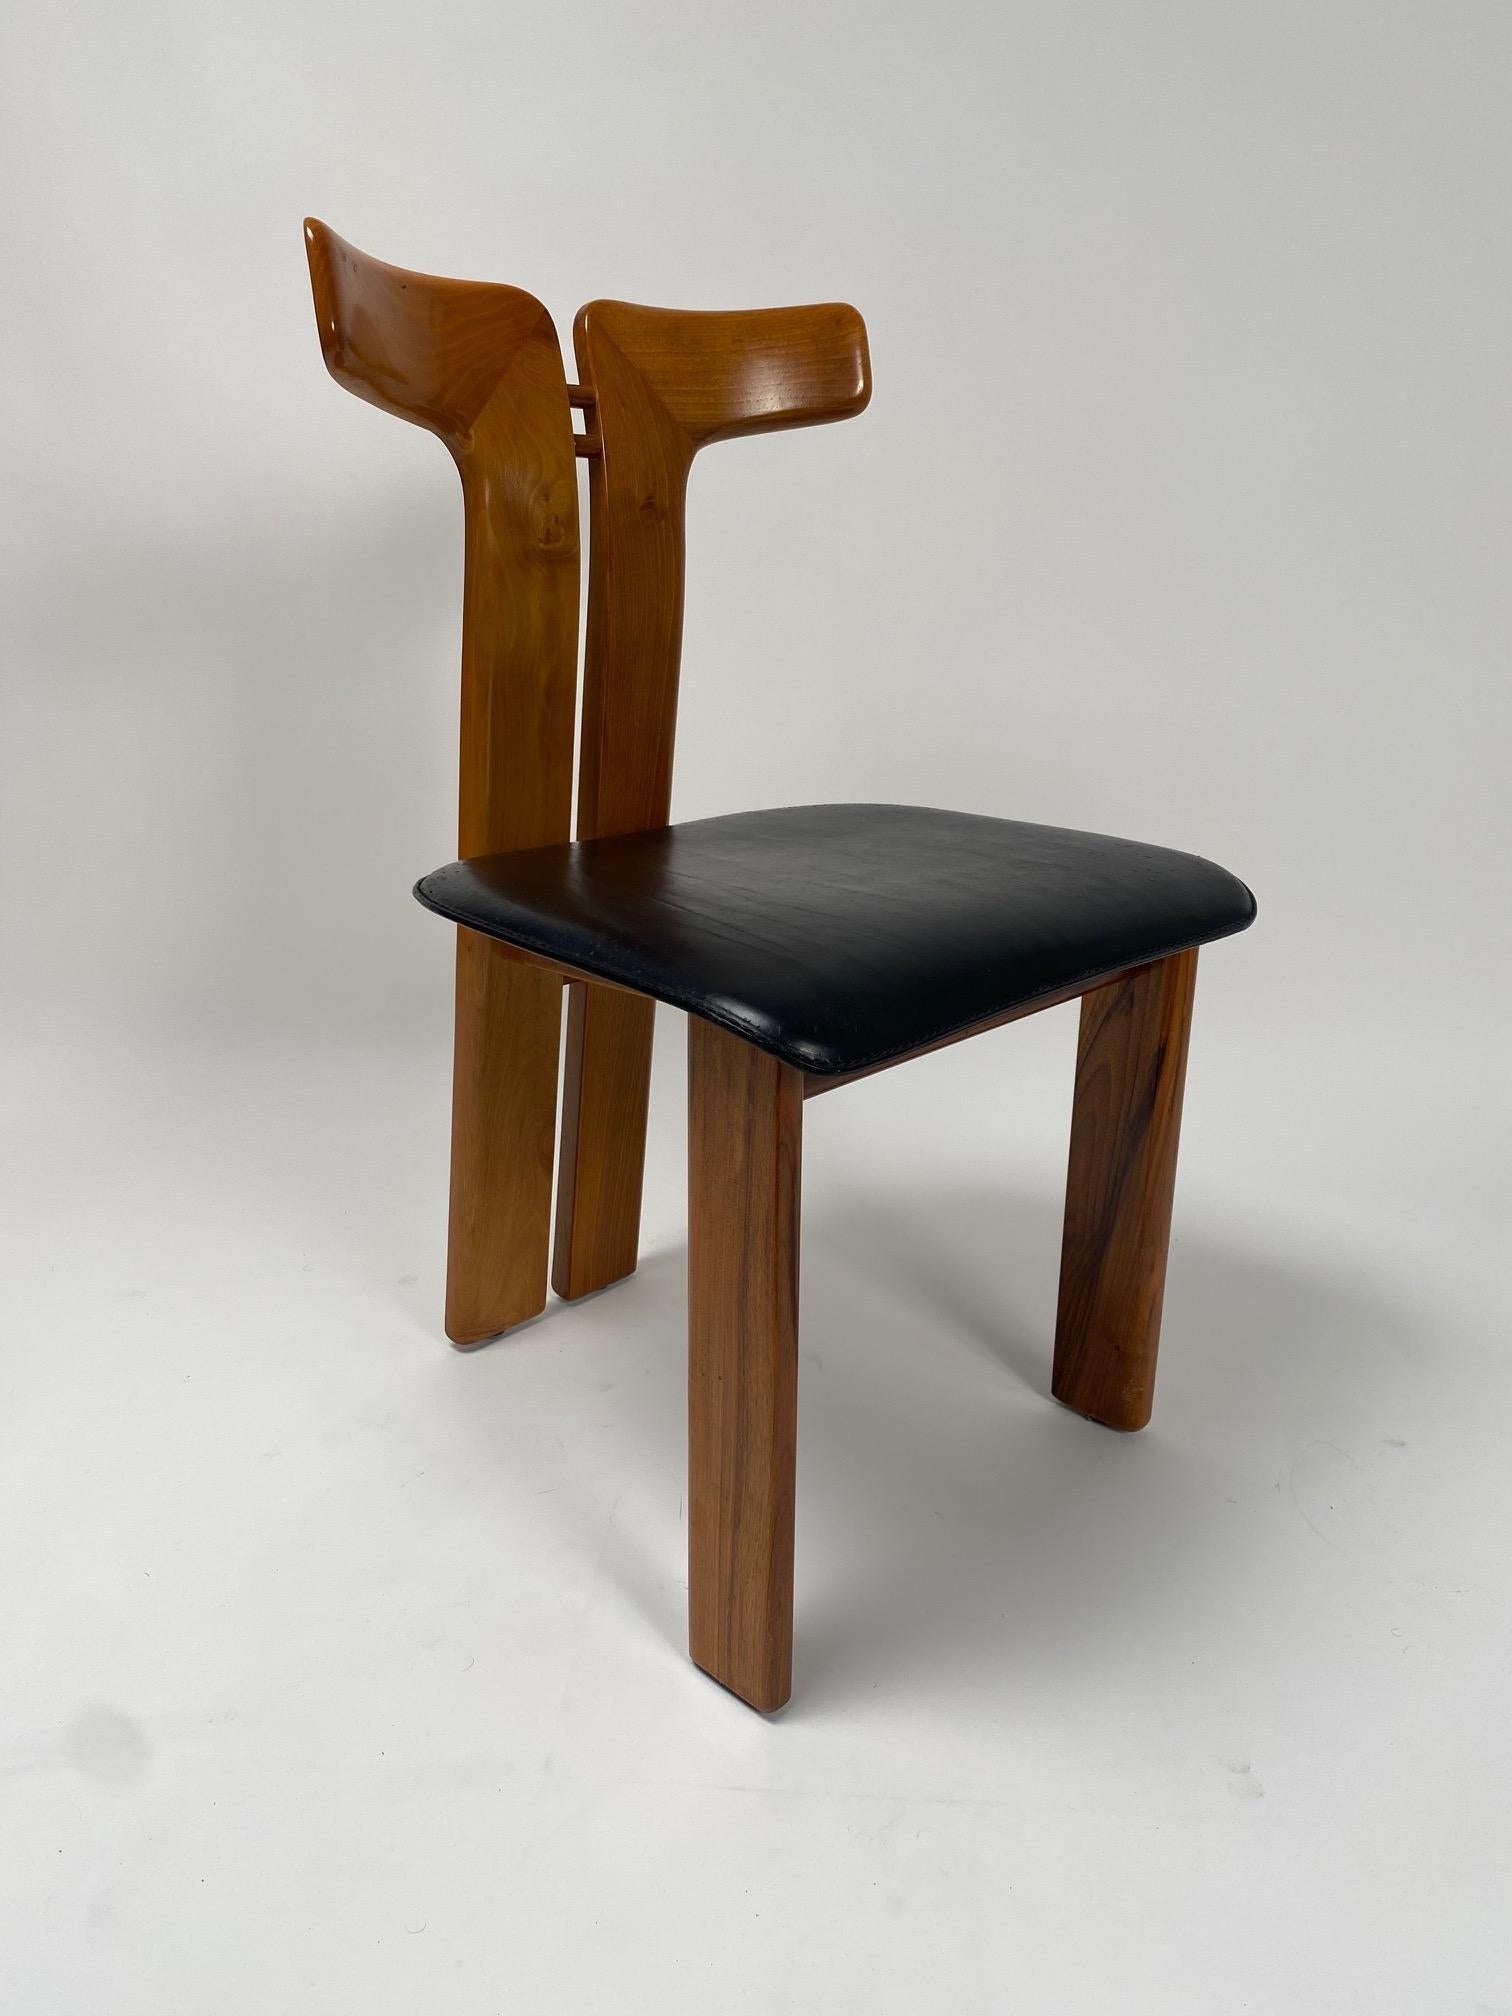 Pierre Cardin (1922-2020), Set of six dining chairs in walnut and leather, Italy, 1970s.

Four rare chairs made by the famous French designer Pierre Cardin in the 70s for an Italian company. It is a sculptural and refined model, which lends itself